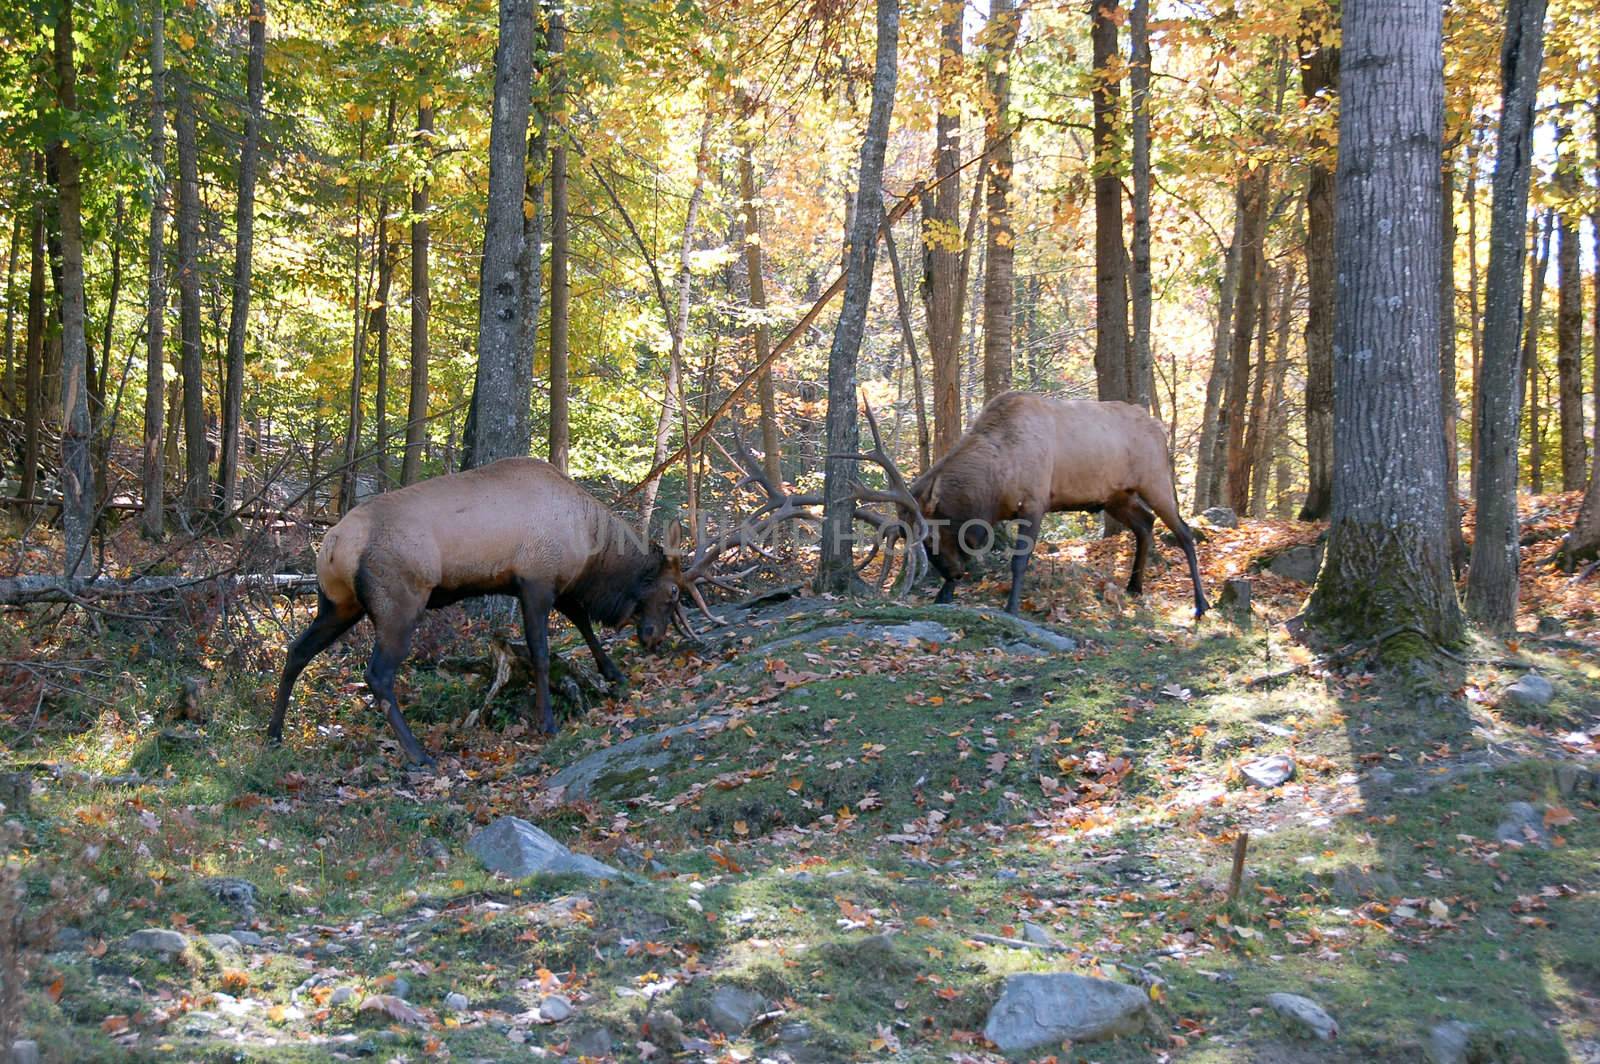 Two mature elks (Cervus canadensis) fighting together in an autumn forest